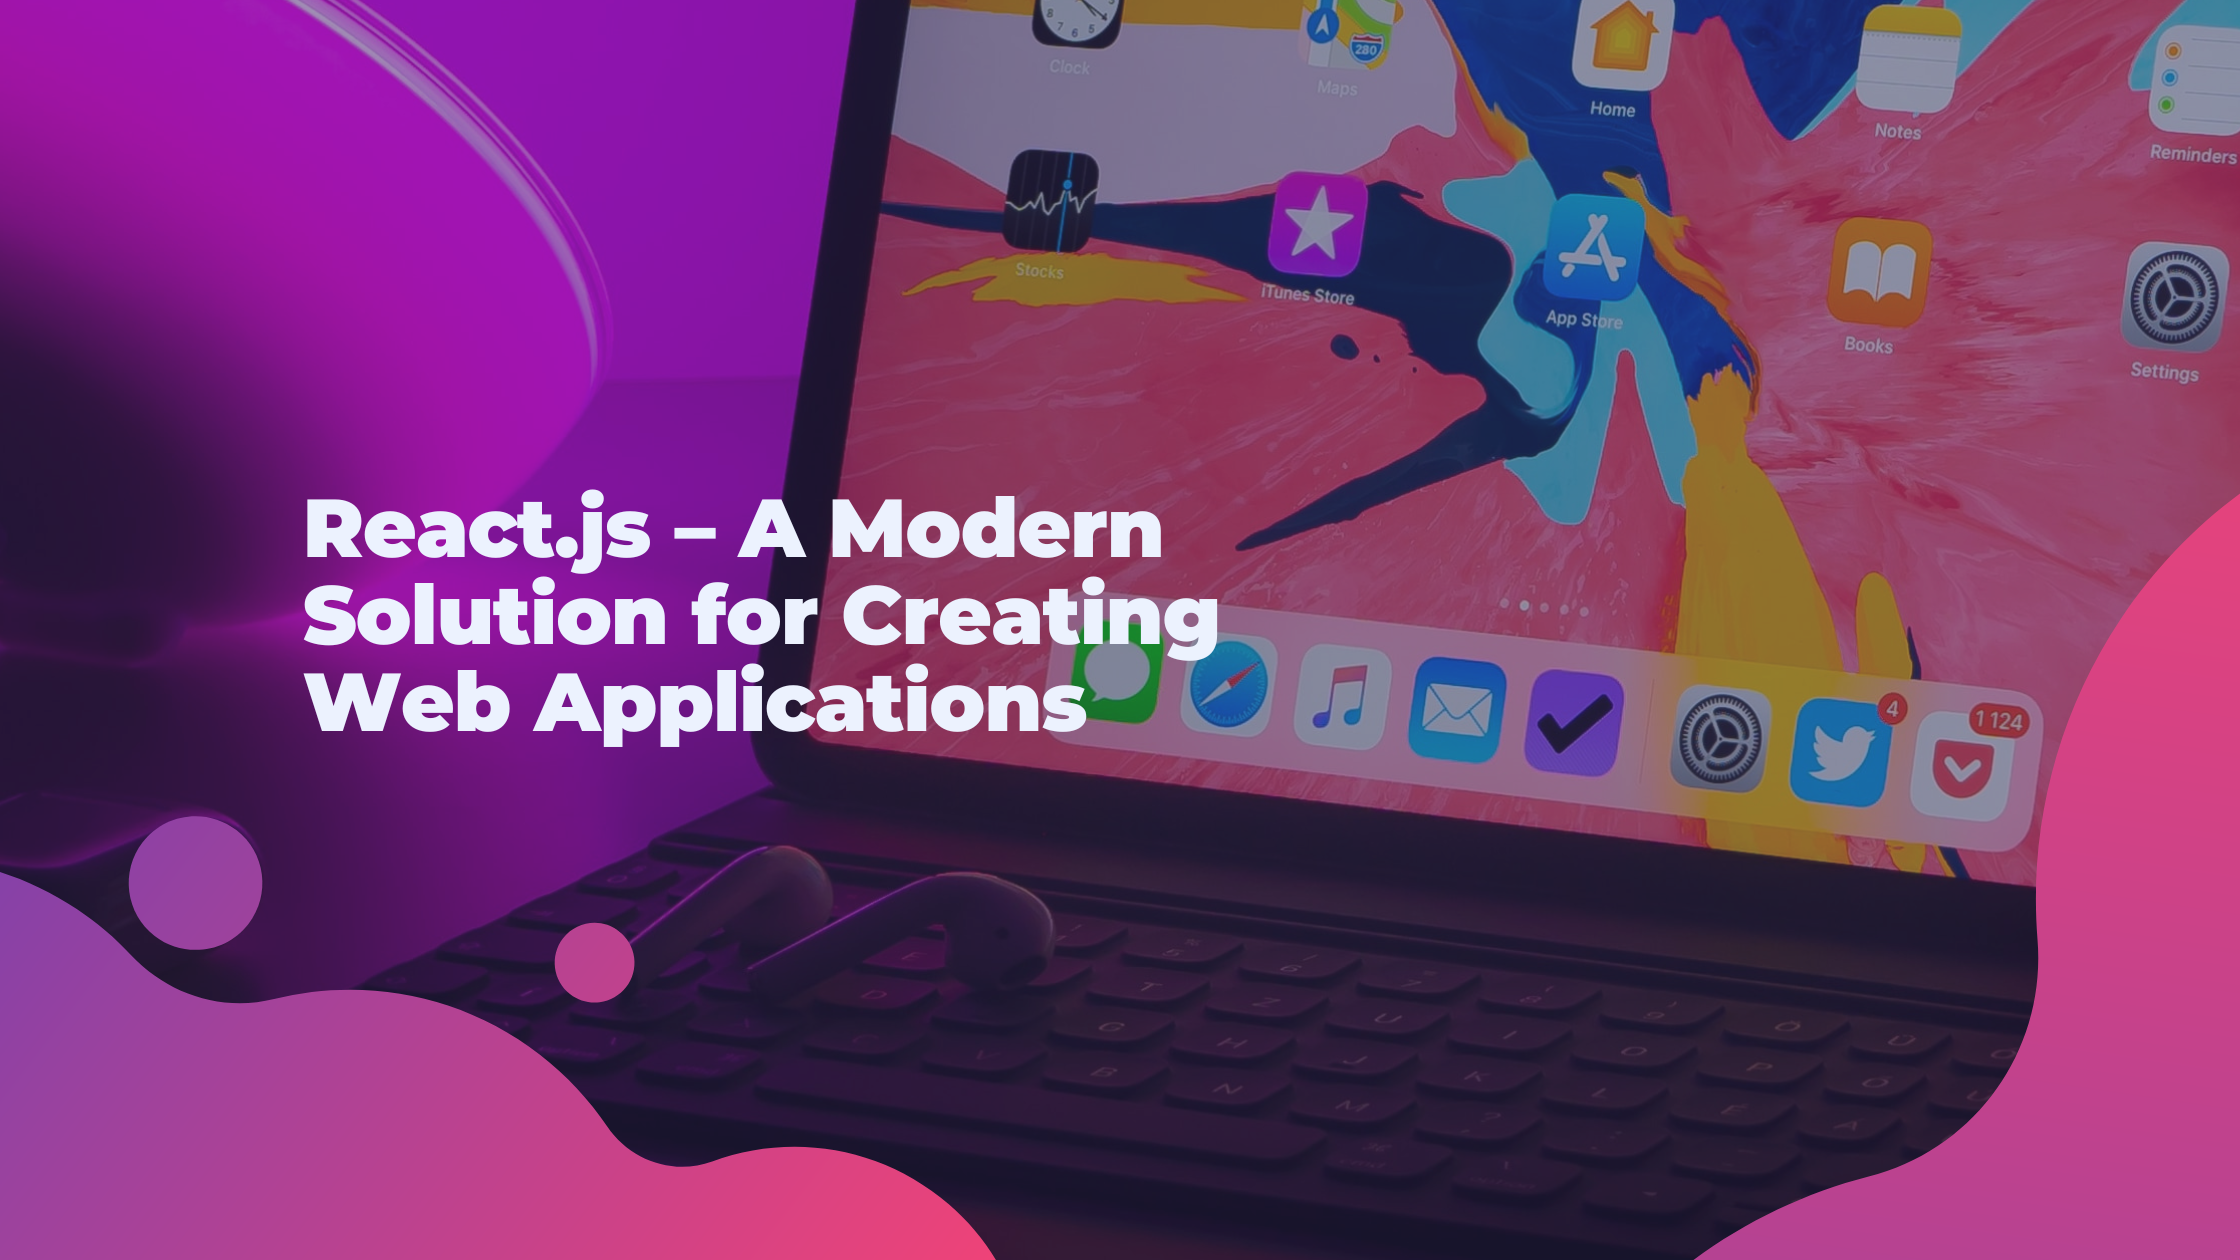 React.js – A Modern Solution for Creating Web Applications